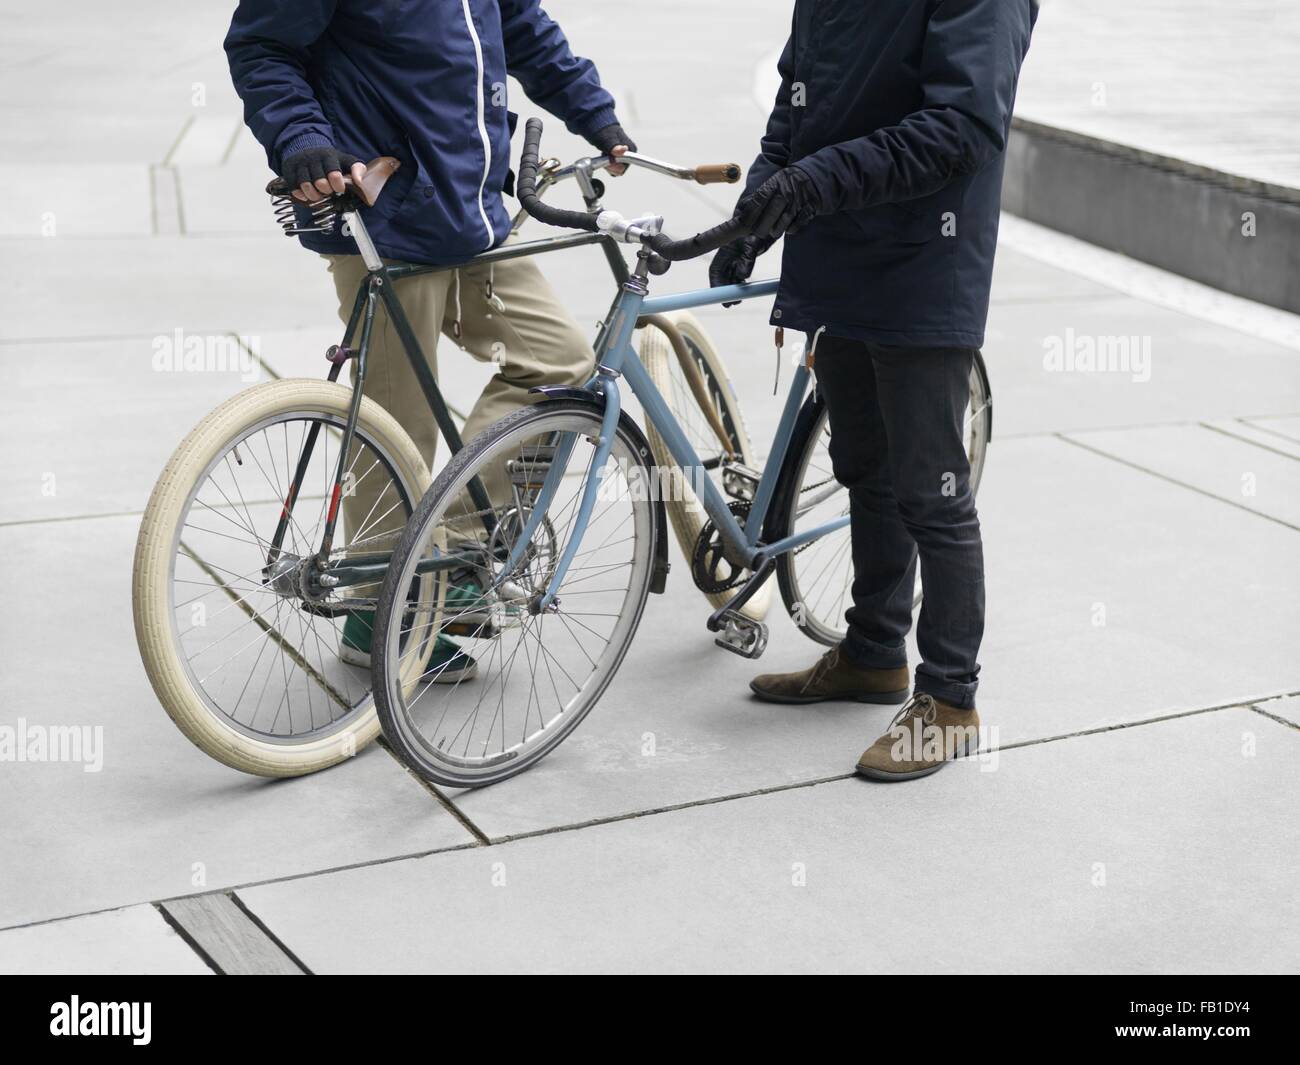 Neck down view of urban cyclists standing beside bicycle Stock Photo